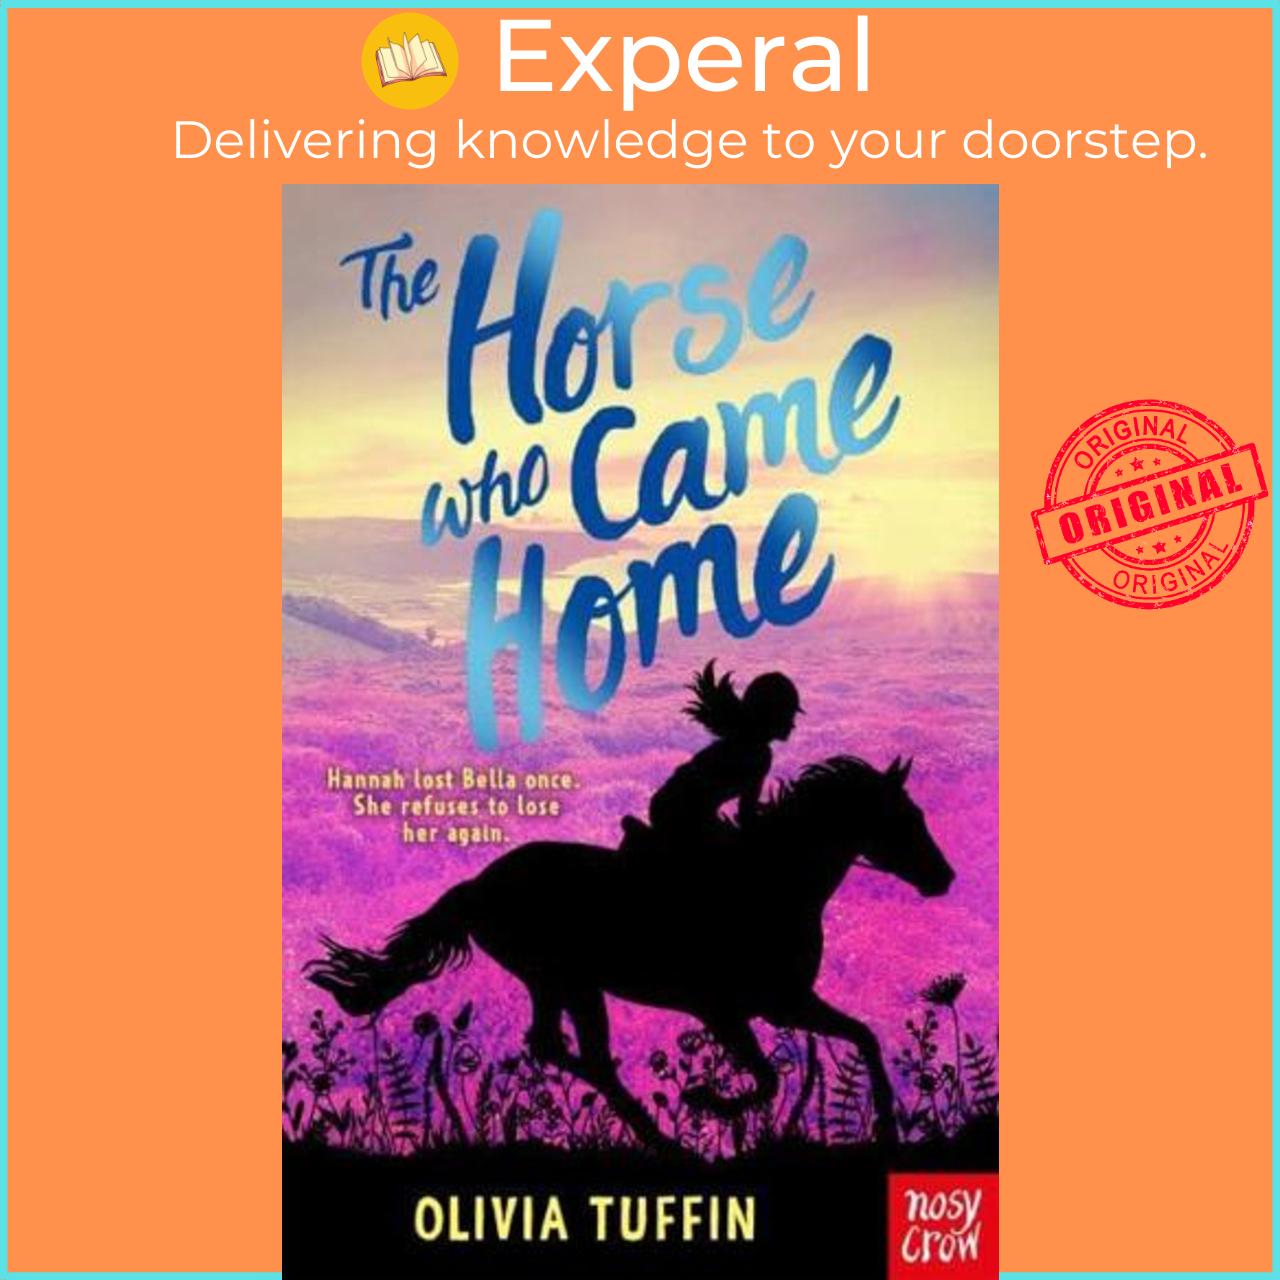 Sách - The Horse Who Came Home - The Horse Who Came Home by Olivia Tuffin (UK edition, Paperback)